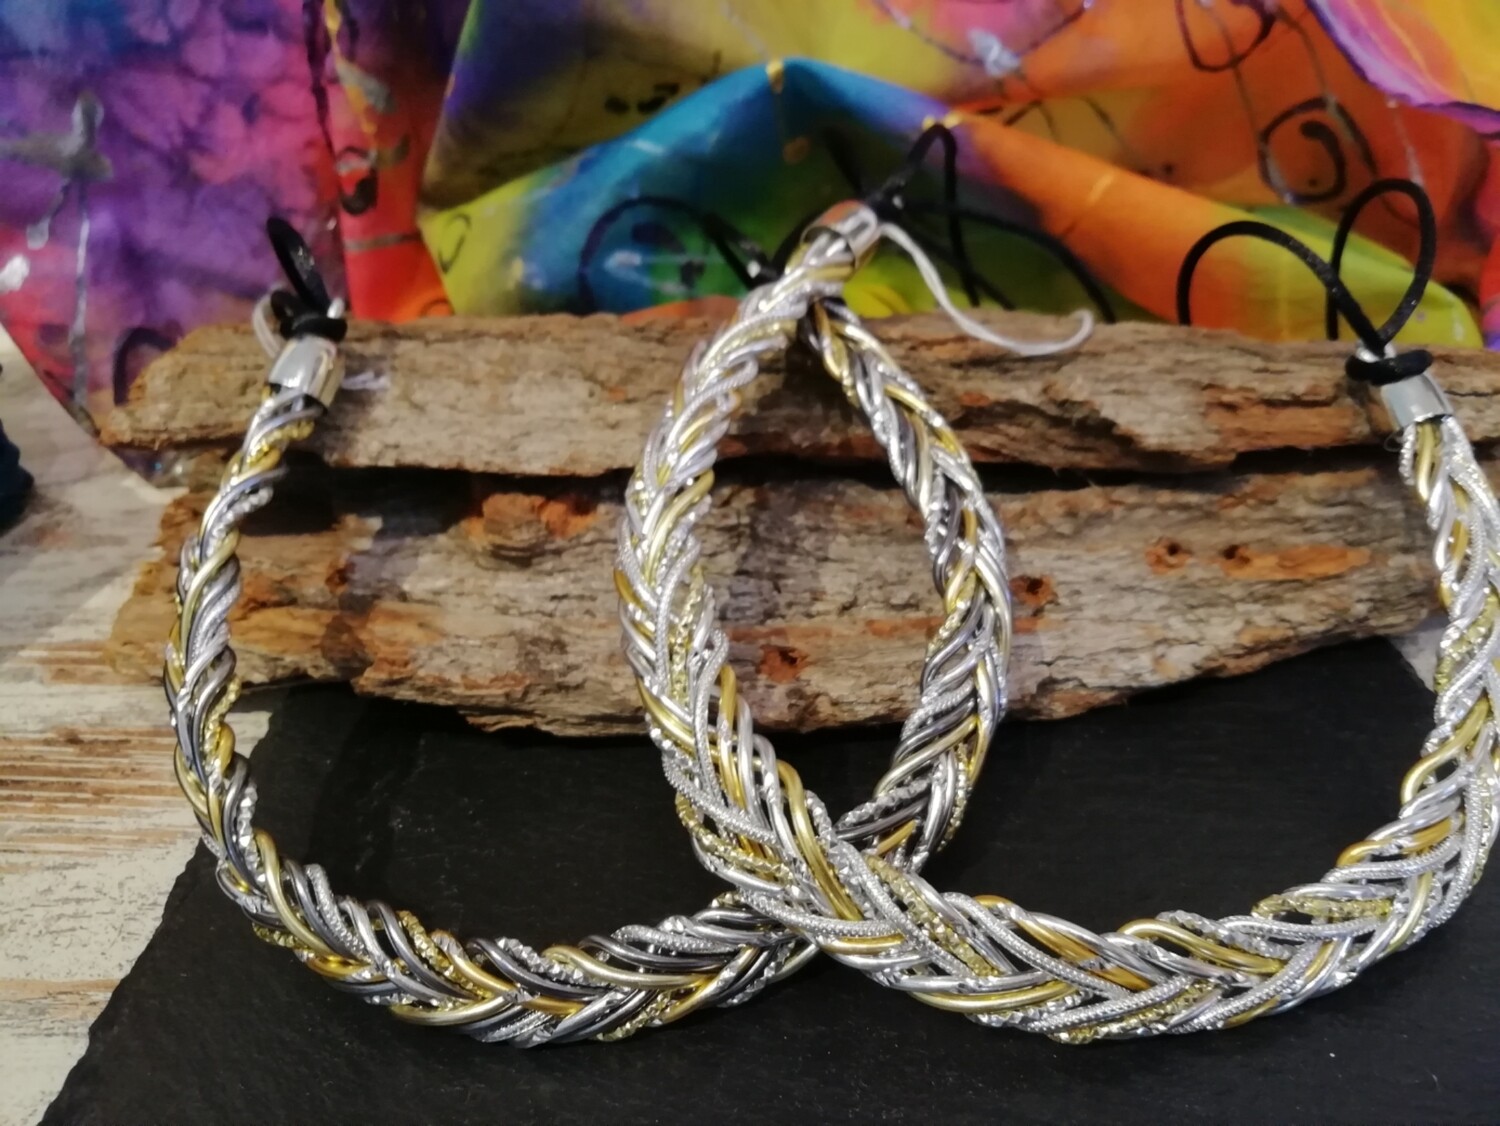 Necklaces mixed silver / gold / grey braided - Handmade by Corinna Kirchhof